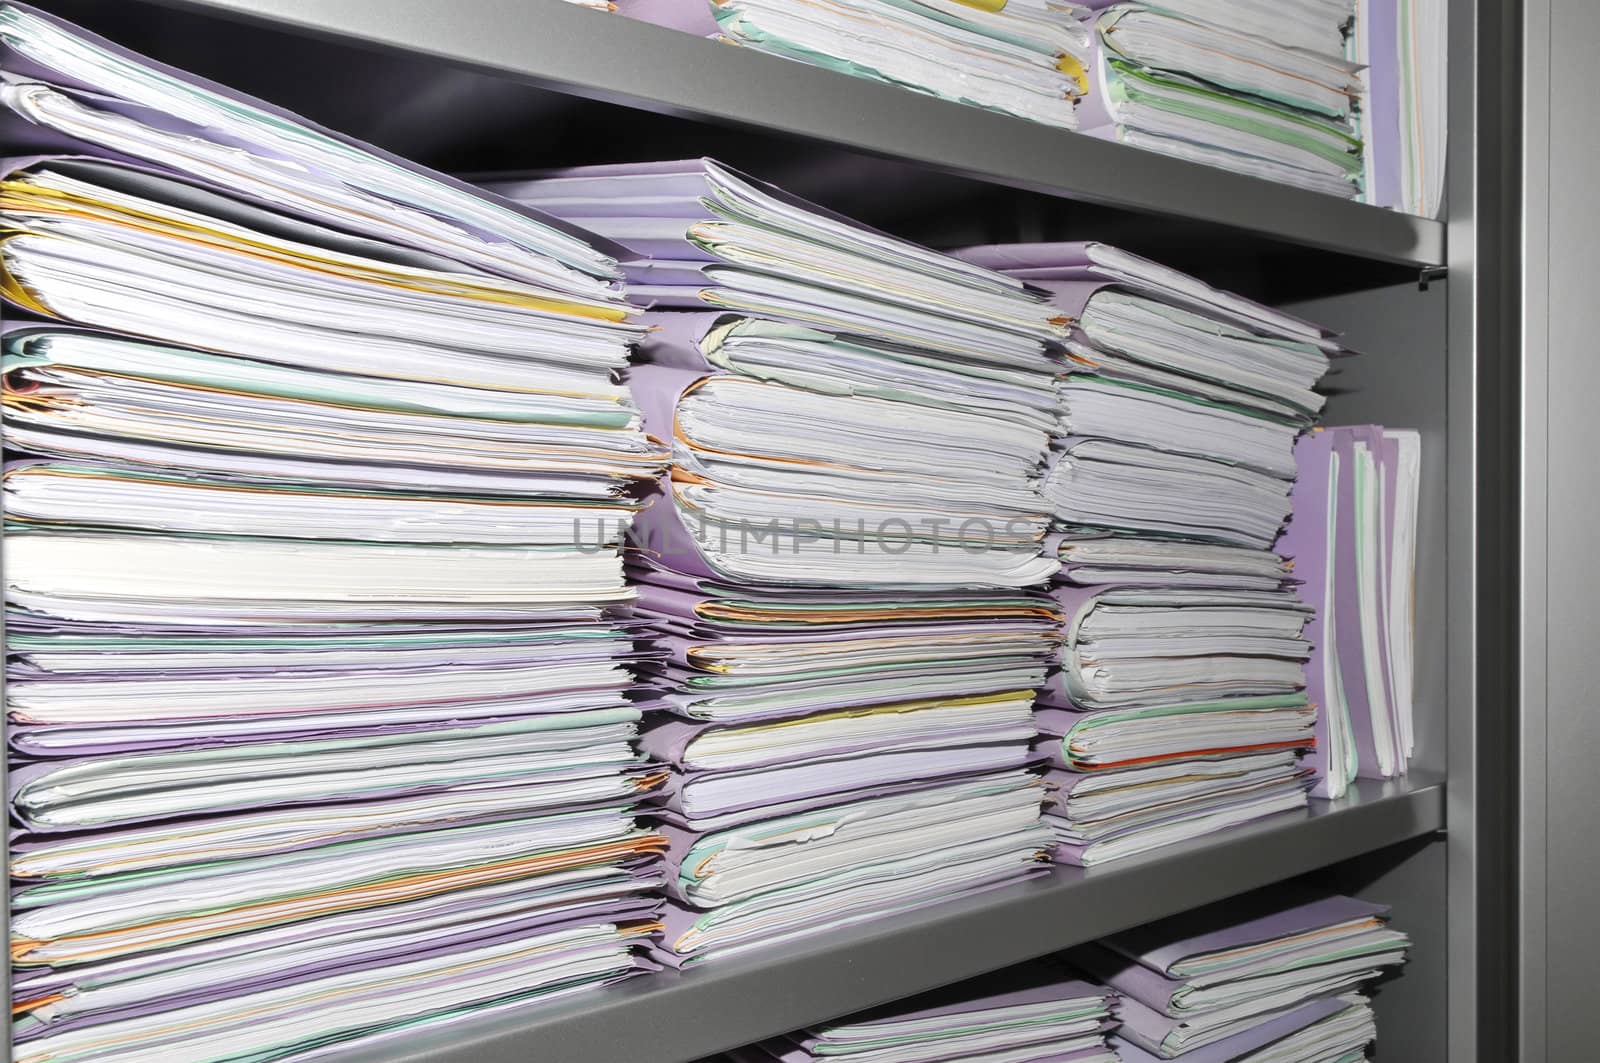 Some stacks of paper folders in a cupboard